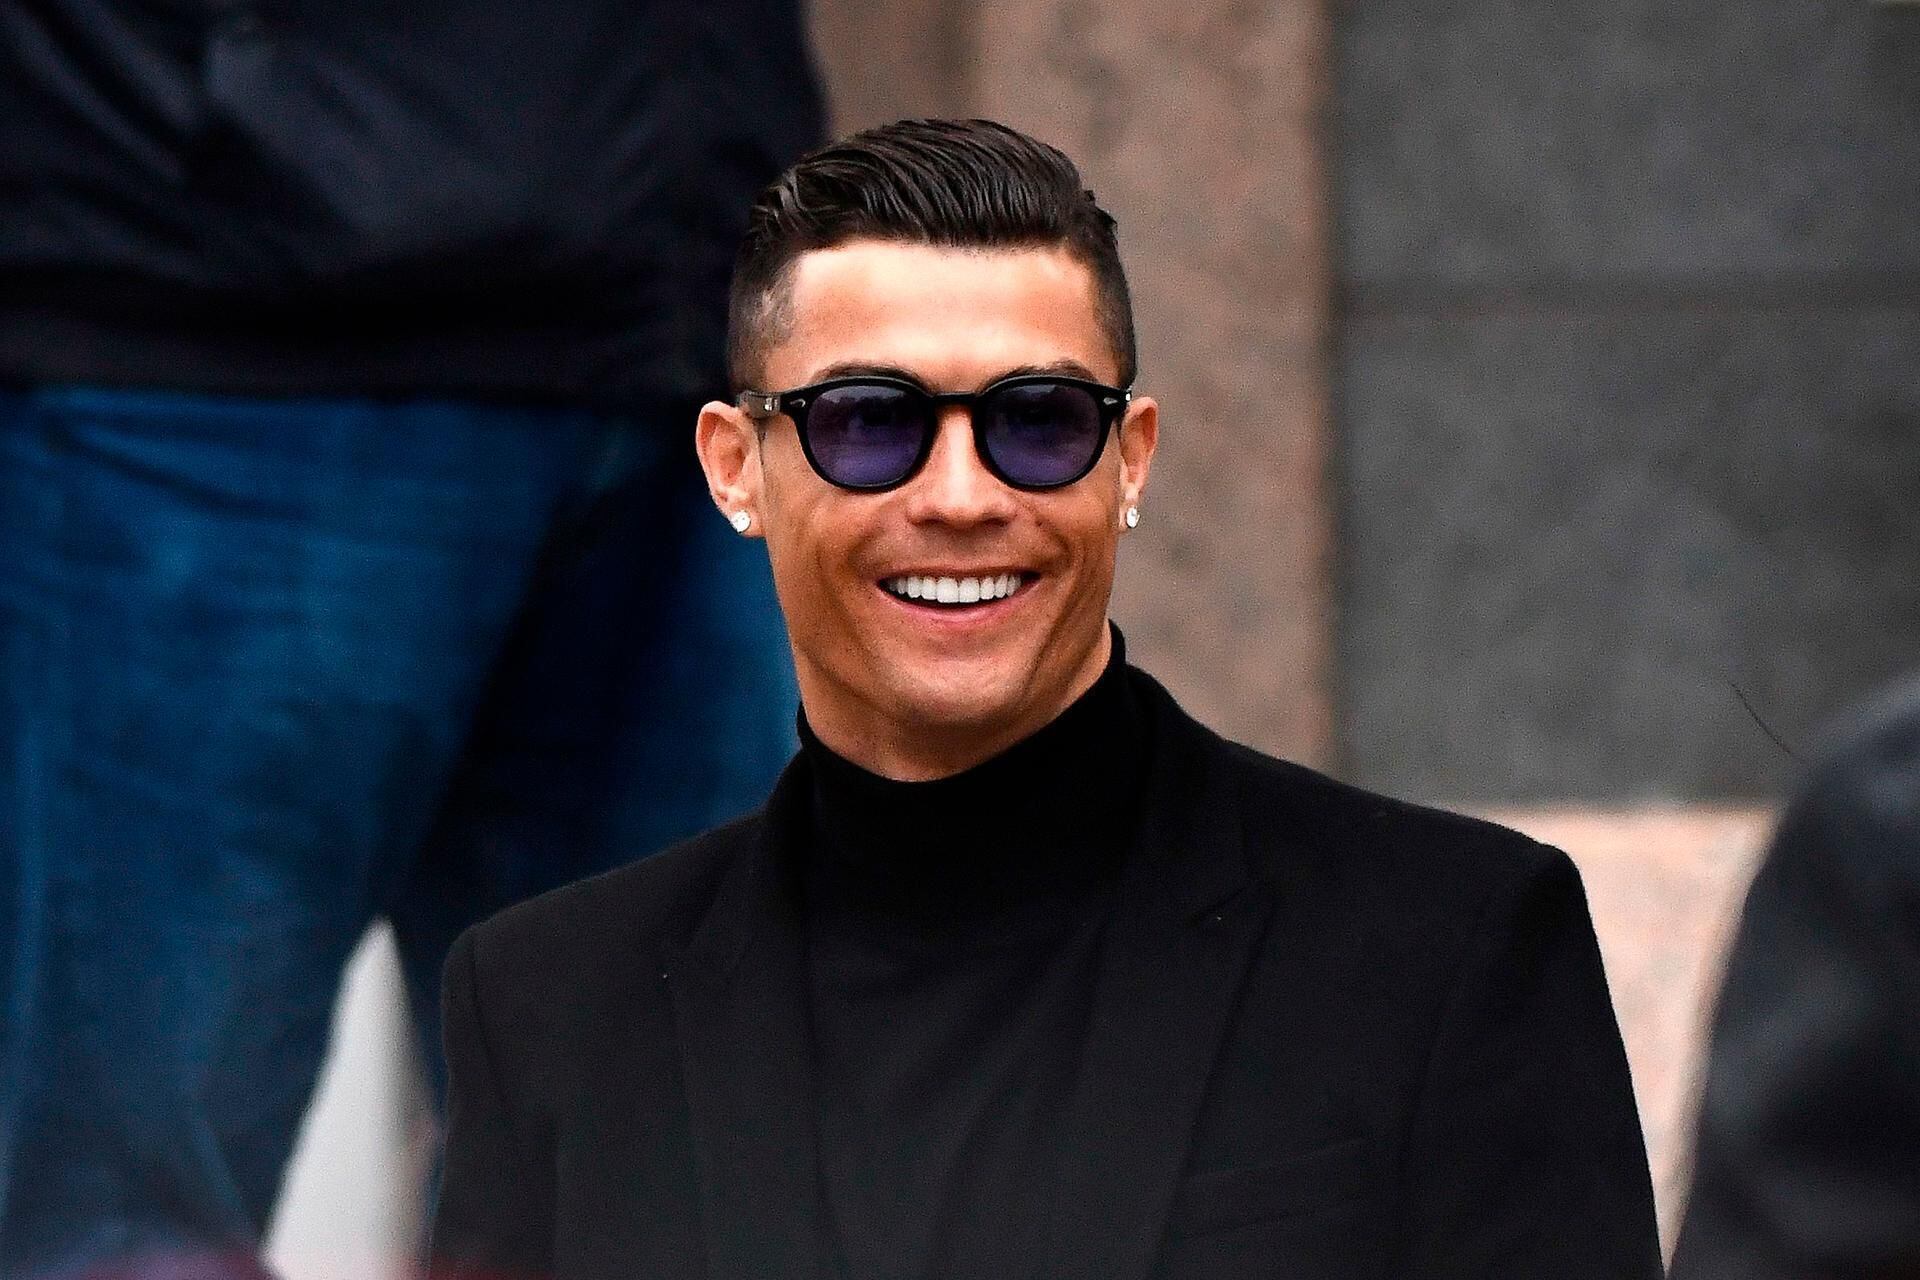 10 interesting facts about Cristiano Ronaldo as the football star